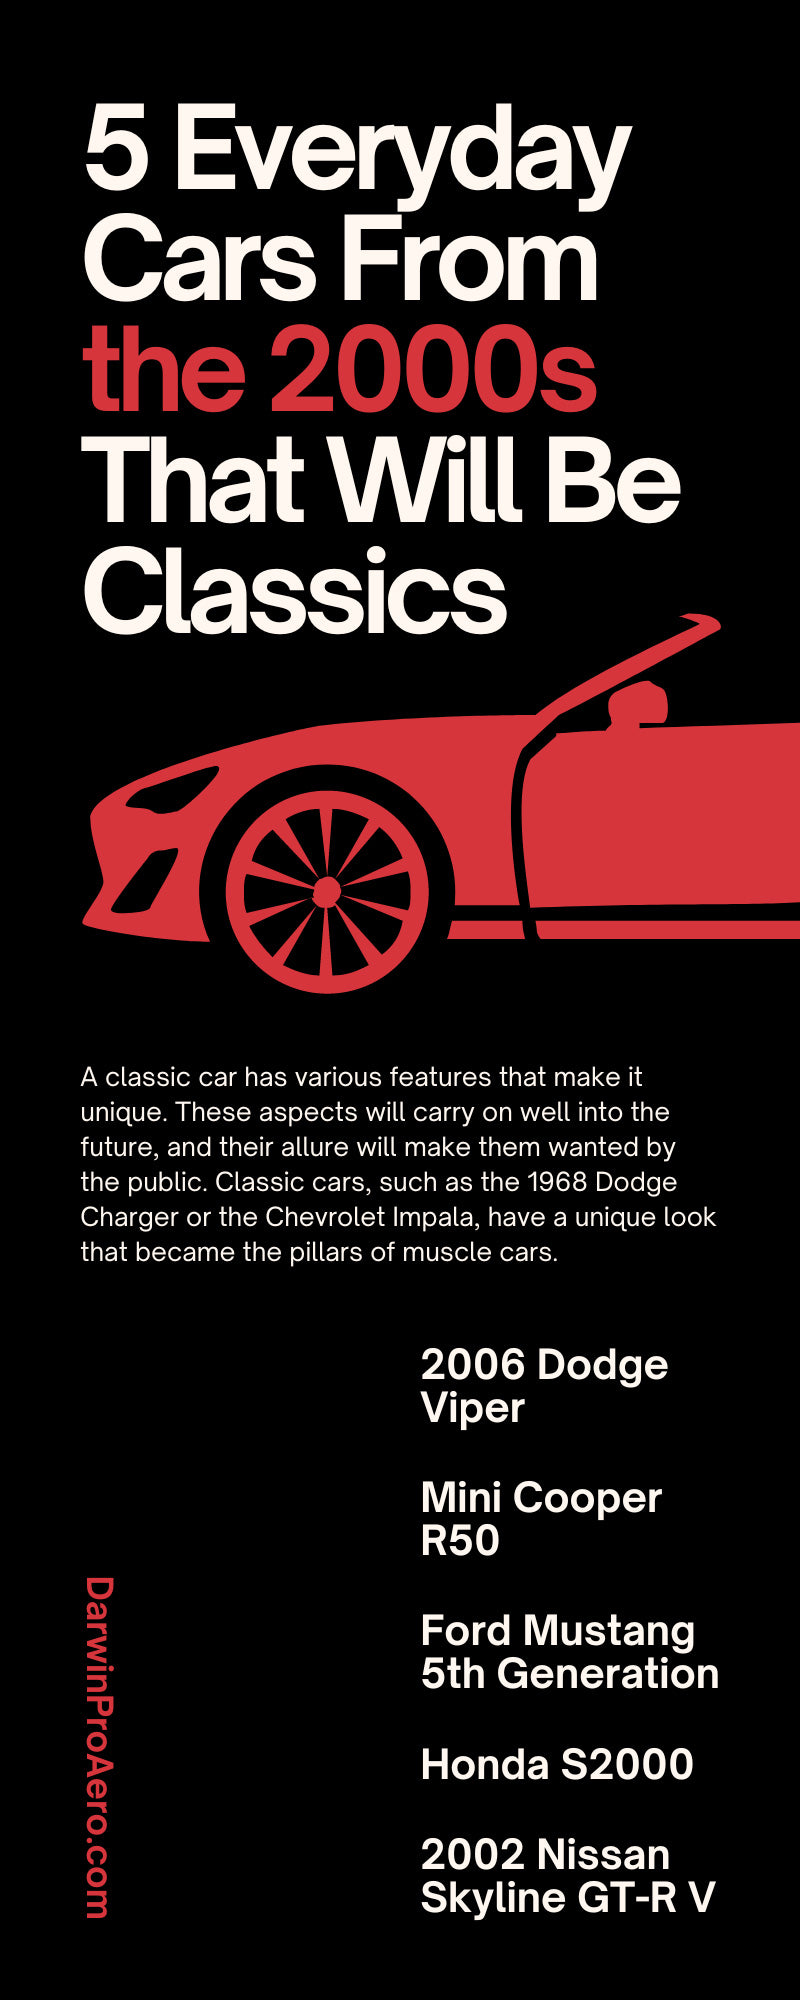 5 Everyday Cars From the 2000s That Will Be Classics